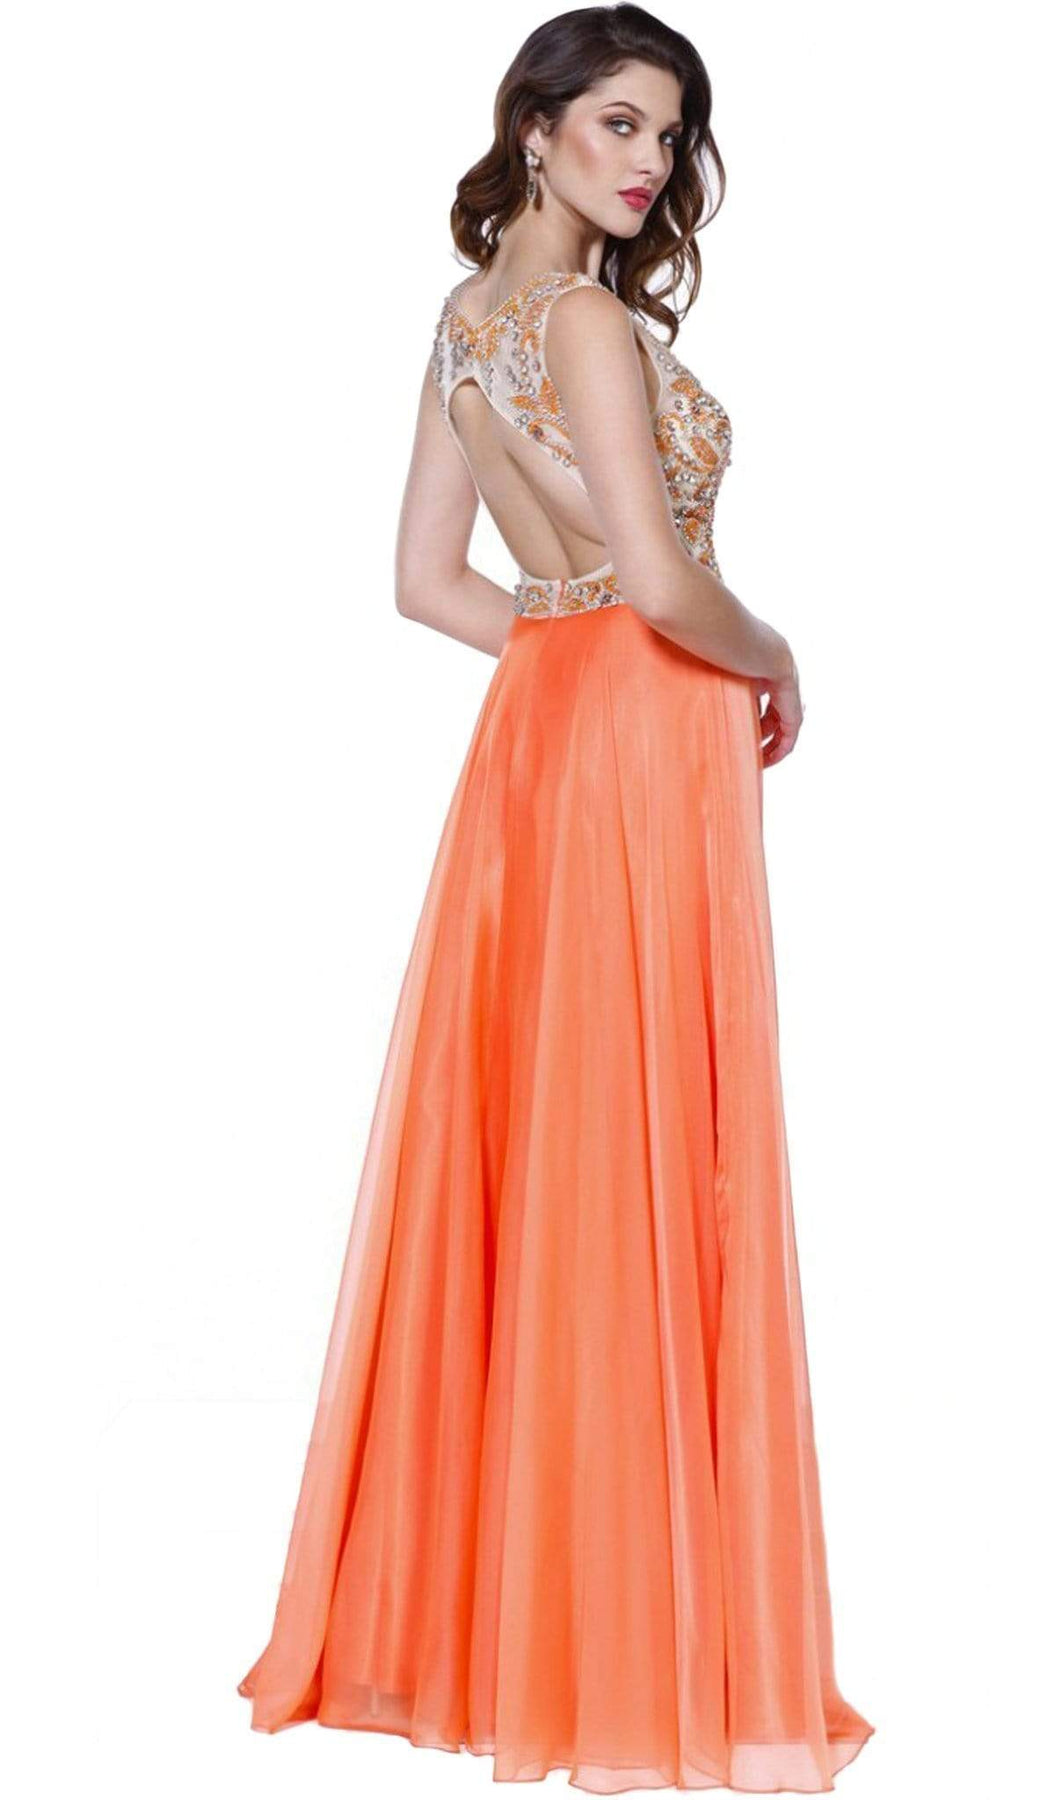 Nox Anabel - 8235 Beaded Embroidery Illusion Evening Gown Special Occasion Dress